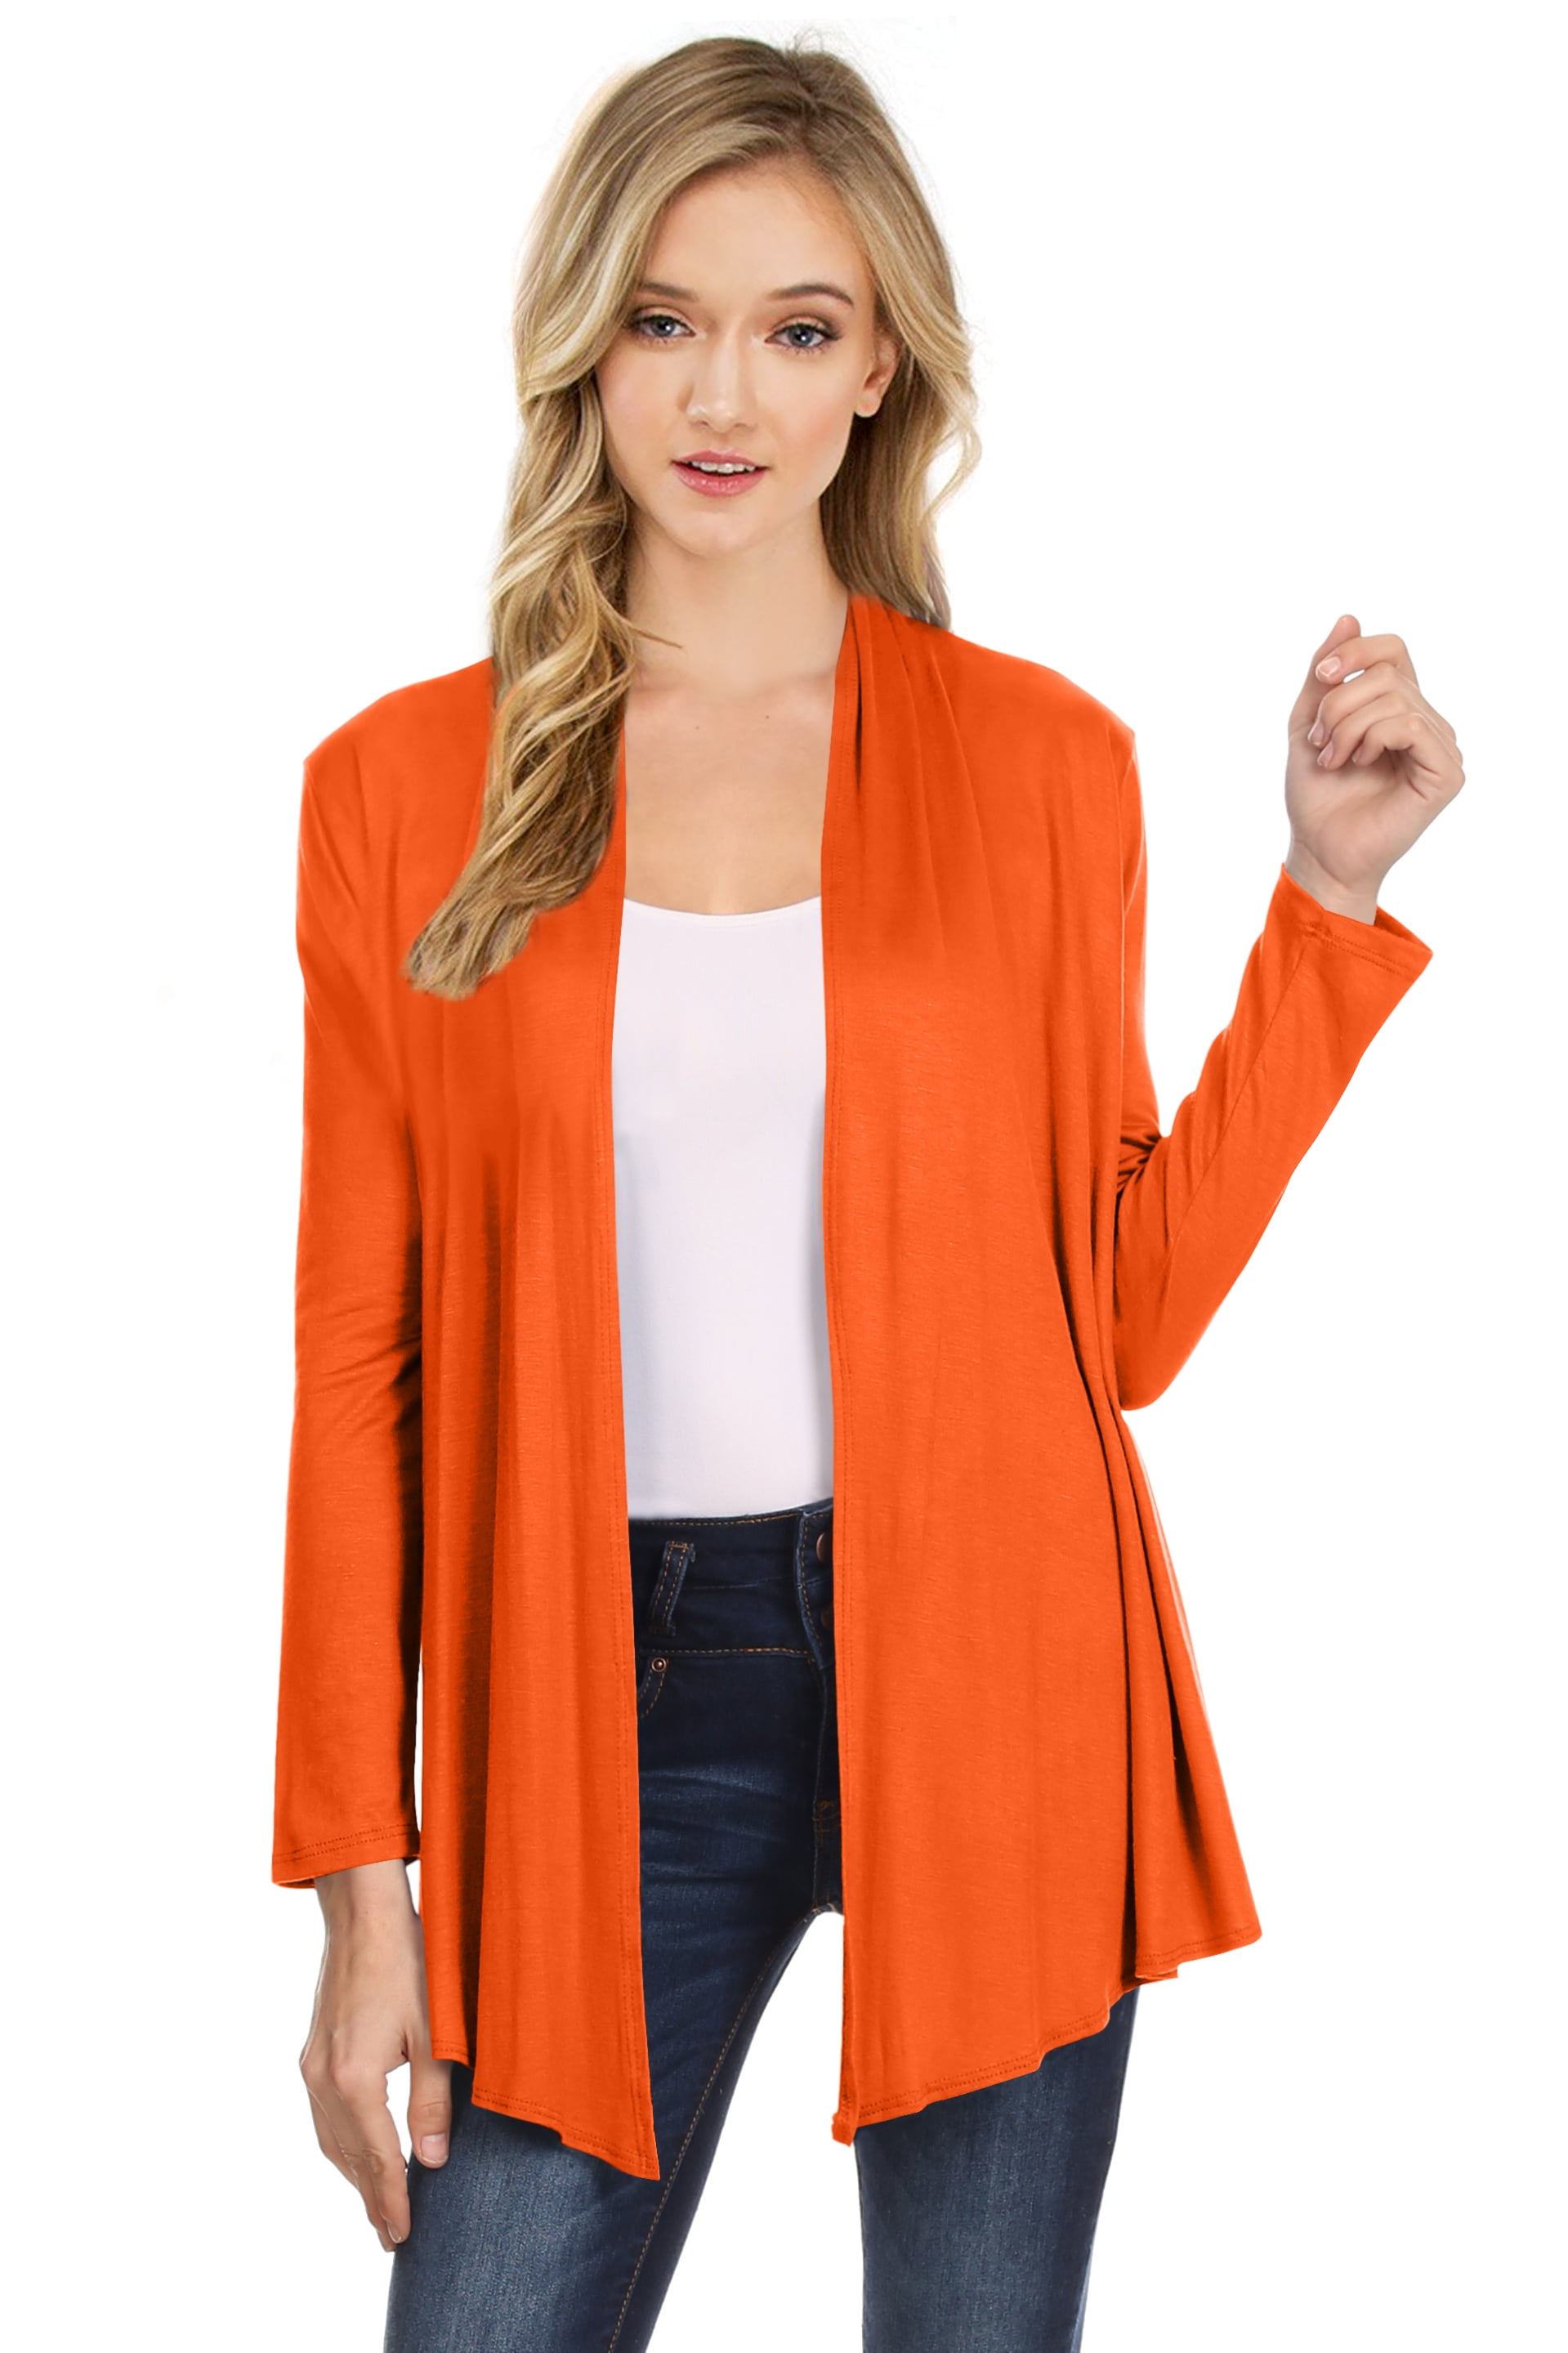 NYL Womens Long Sleeve Open Front Drape Cardigan - Made In USA, Small ...